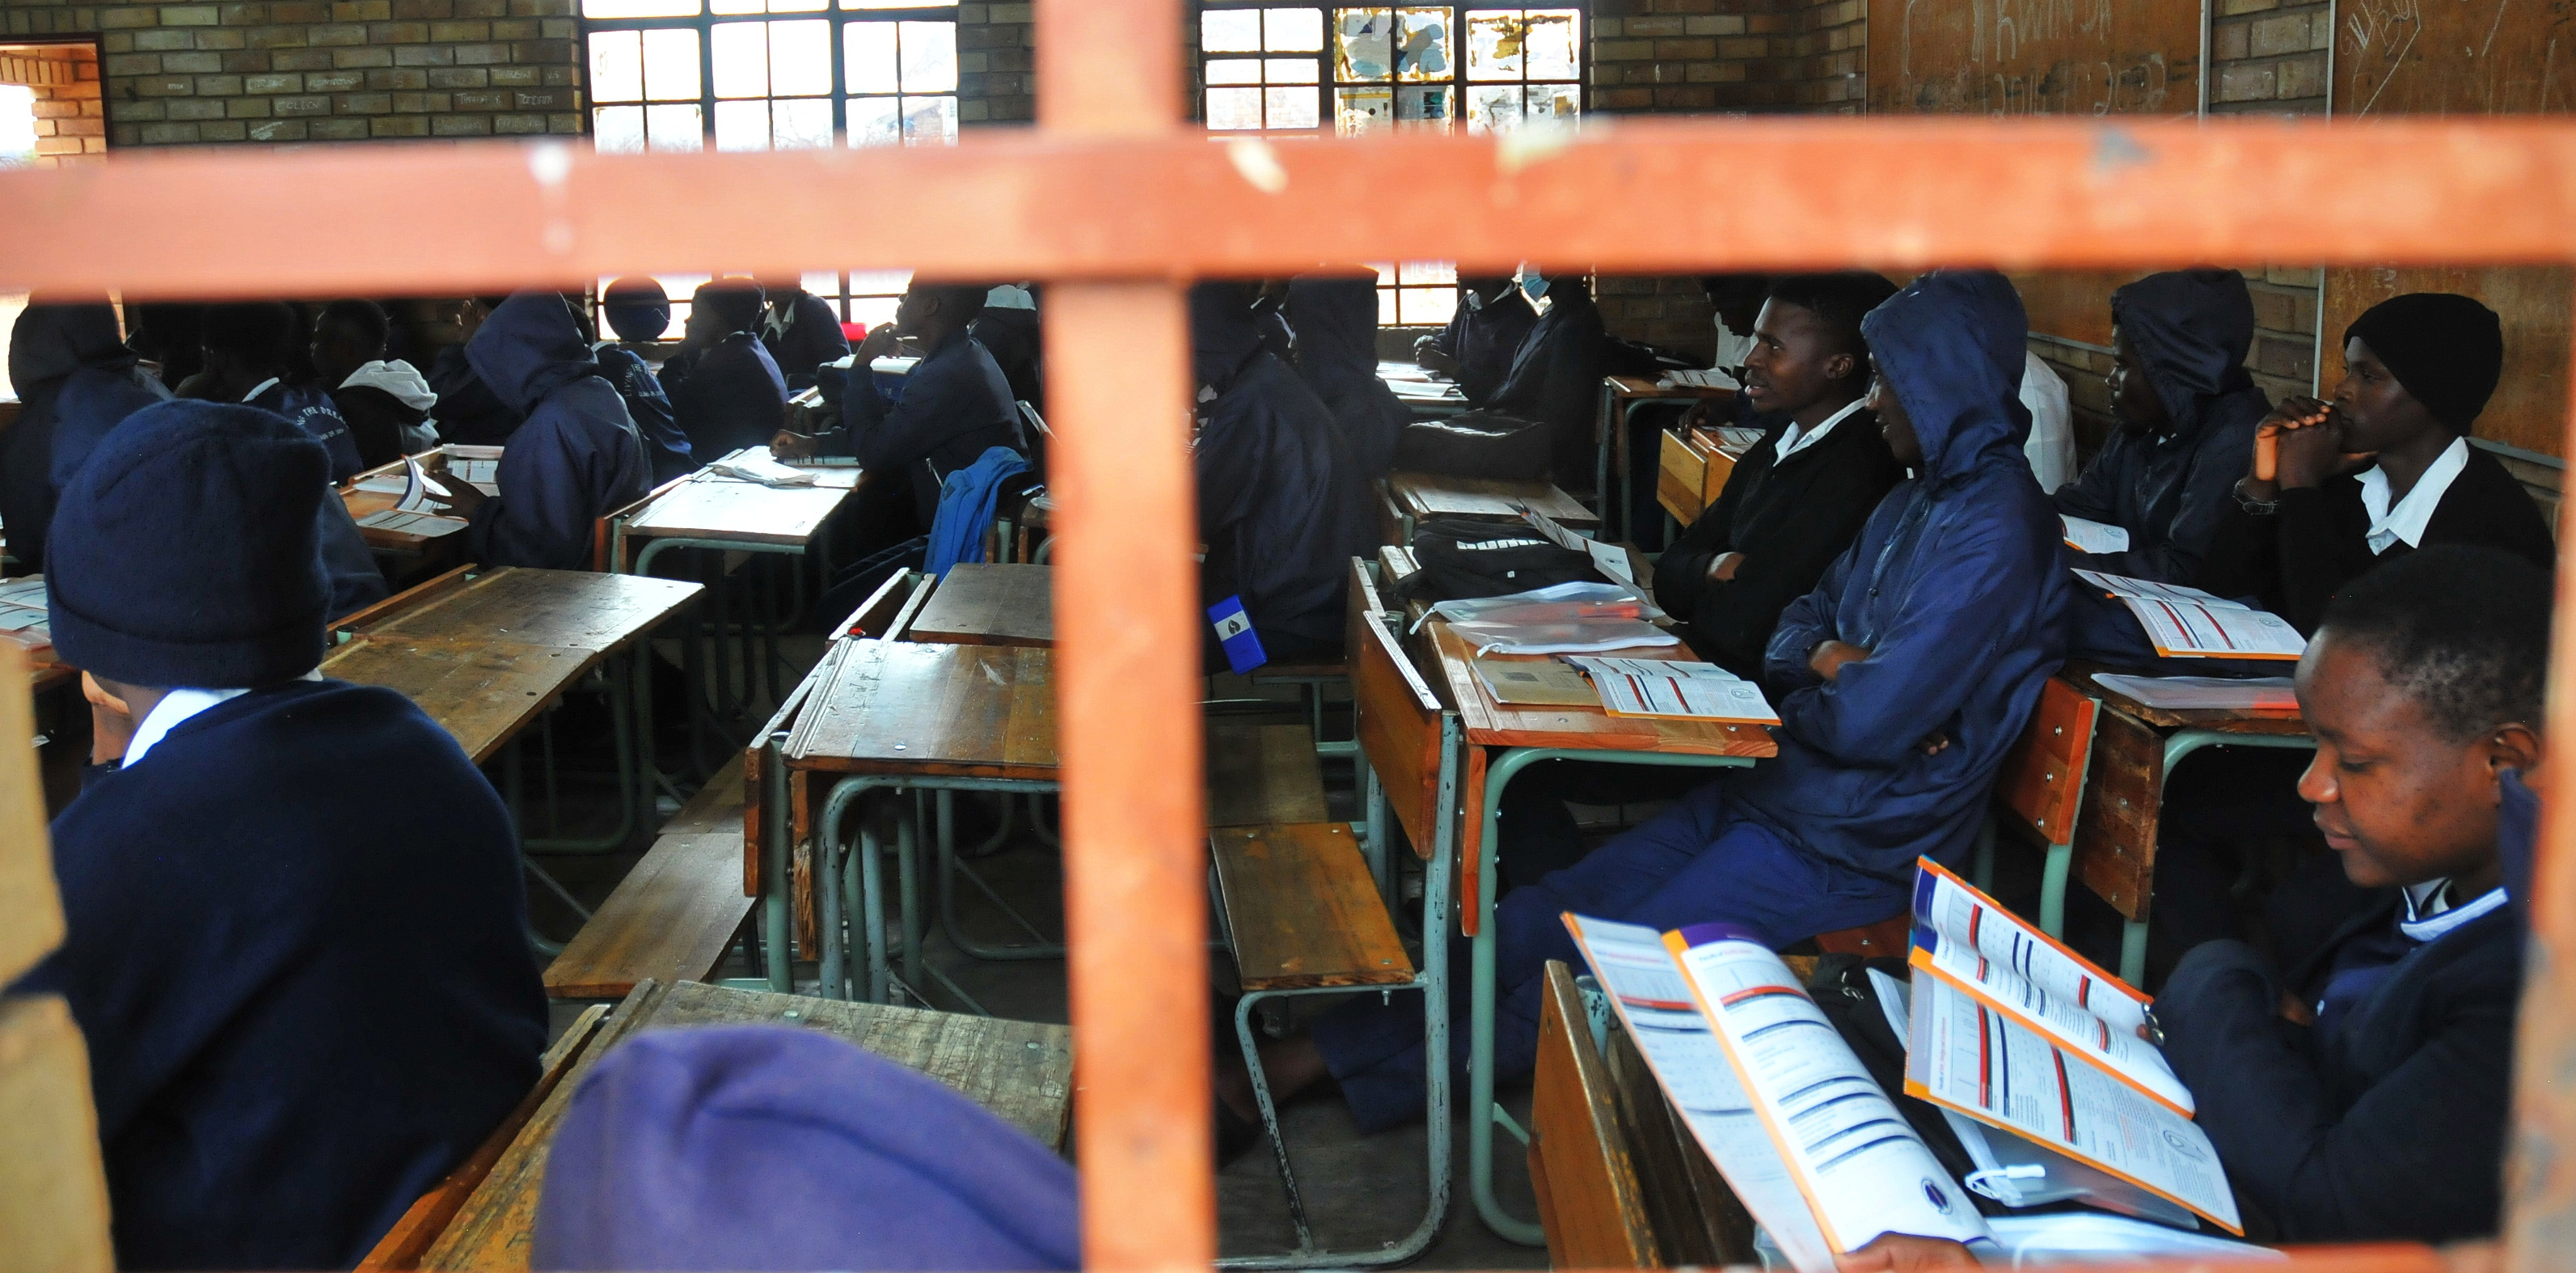 limpopo’s matric strategy pays off as it lifts itself out of bottom spot in national rankings